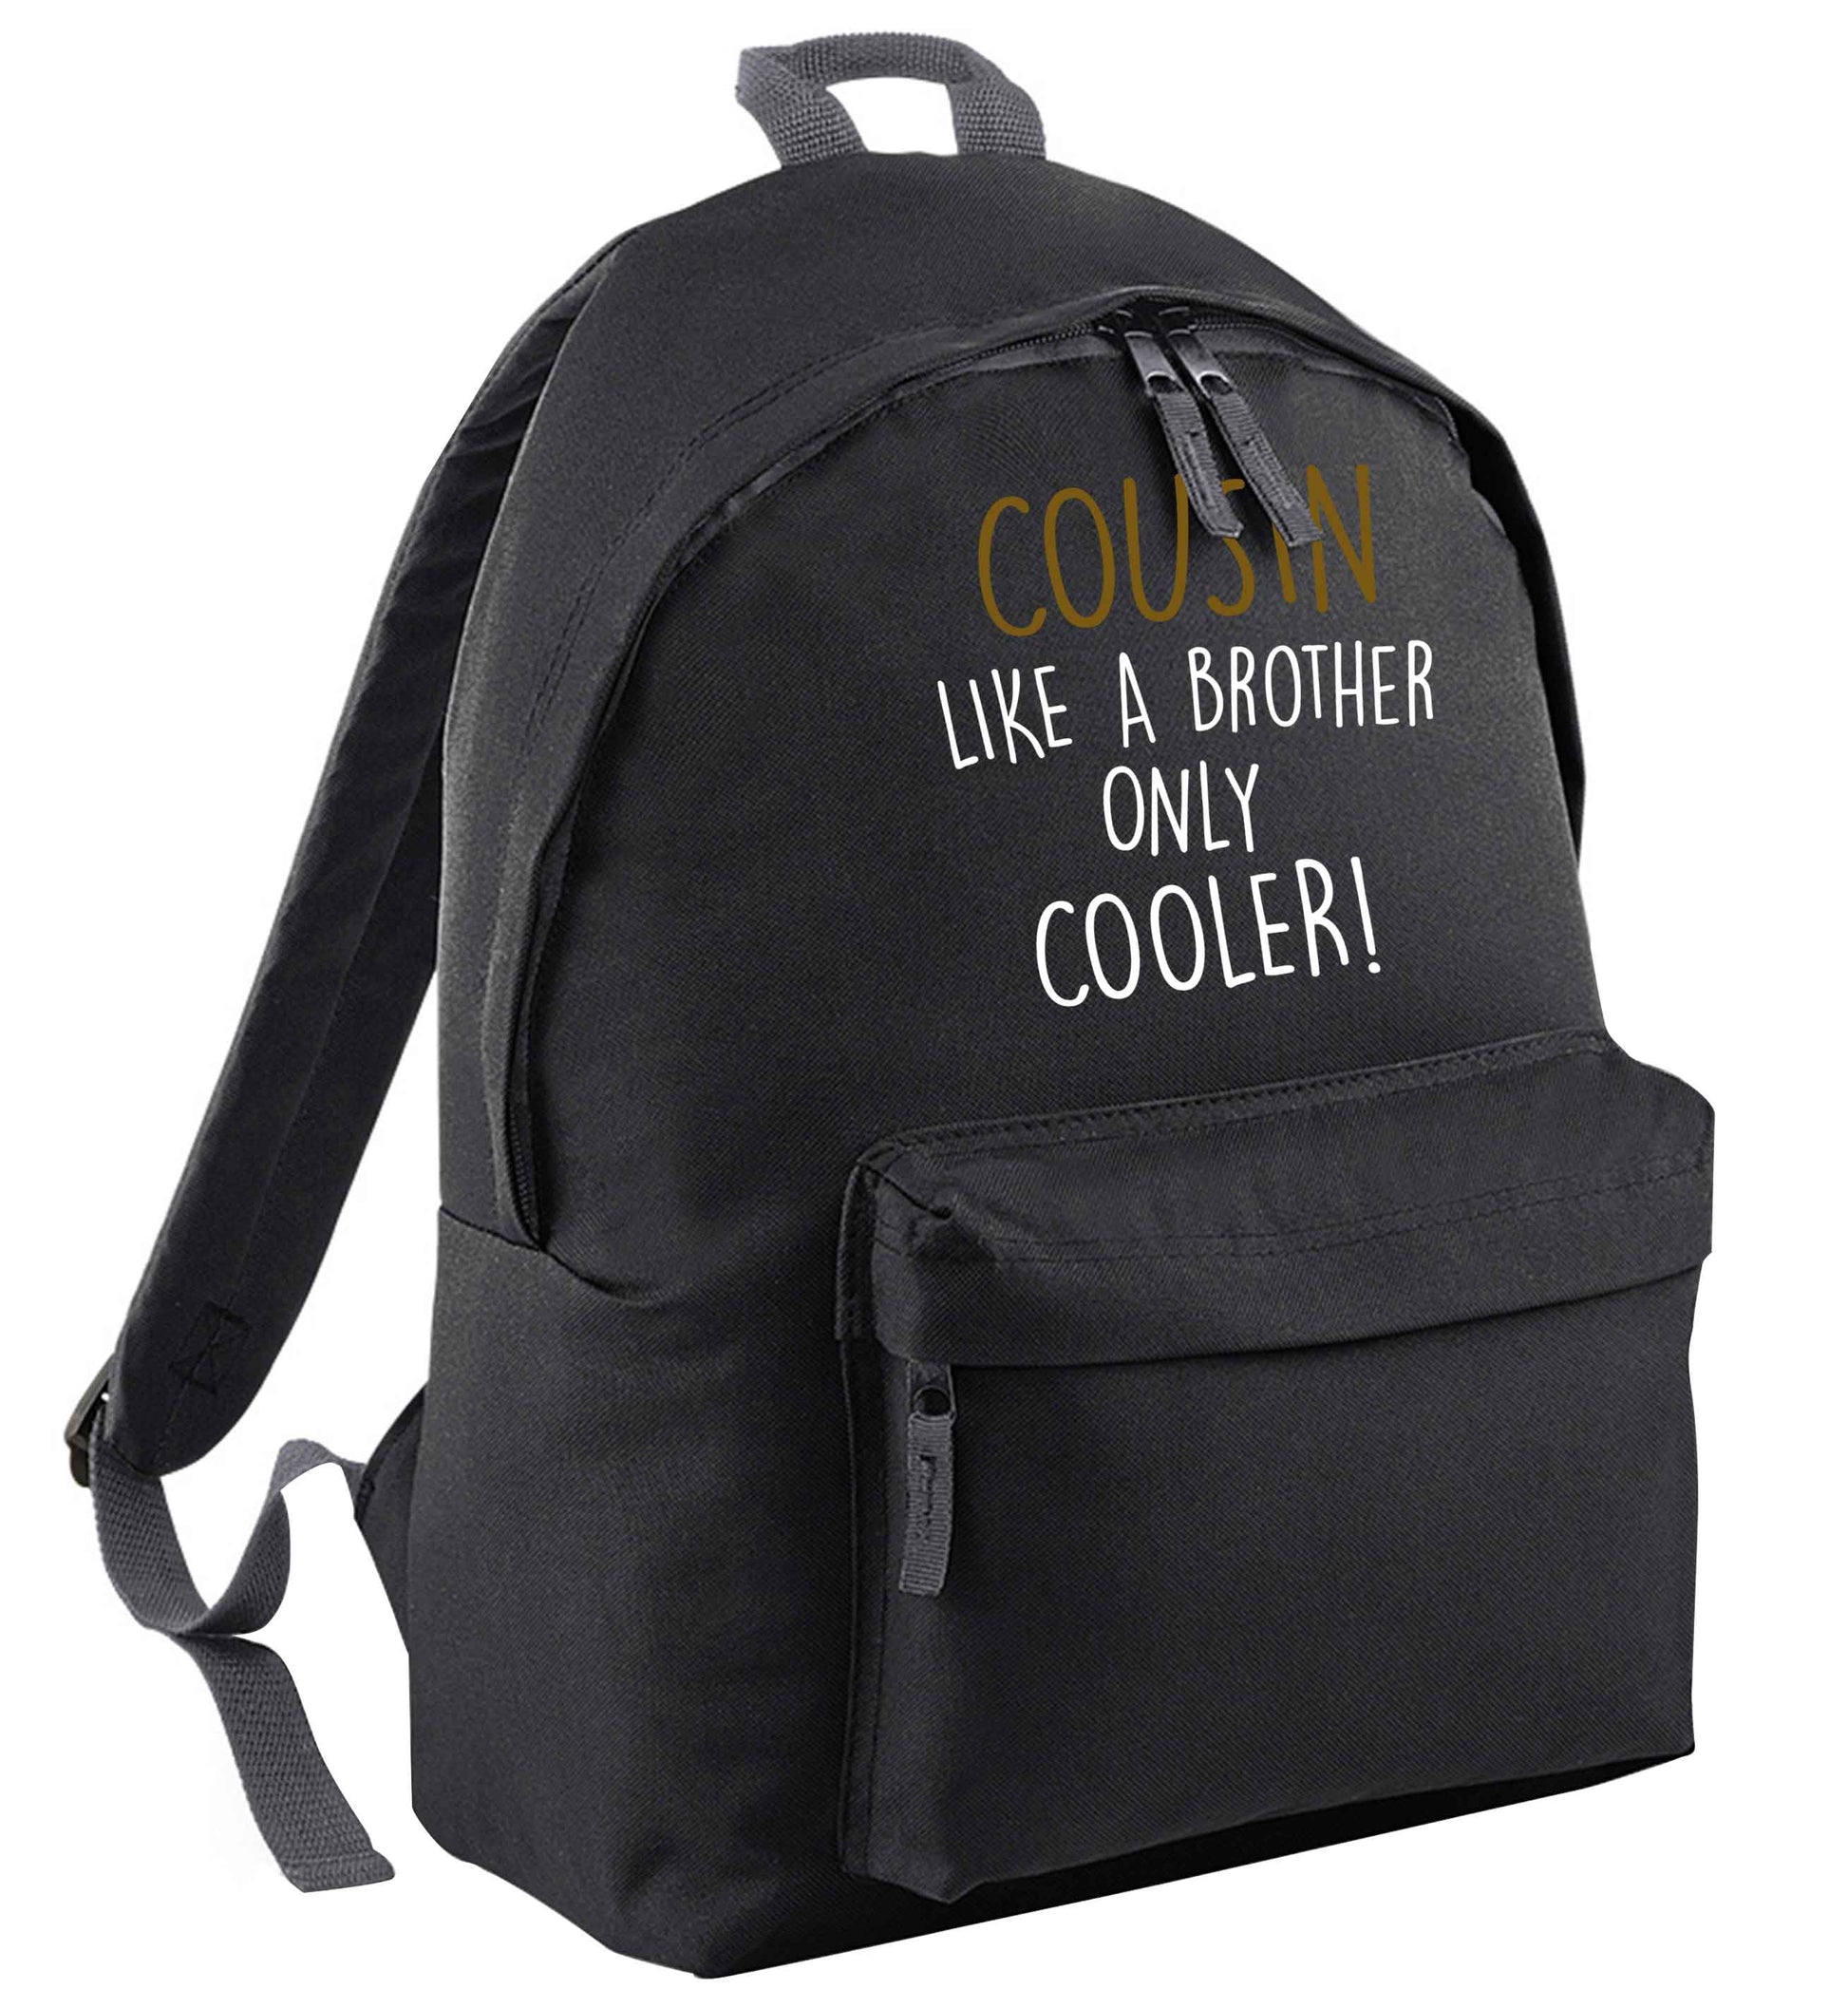 Cousin like a brother only cooler black adults backpack